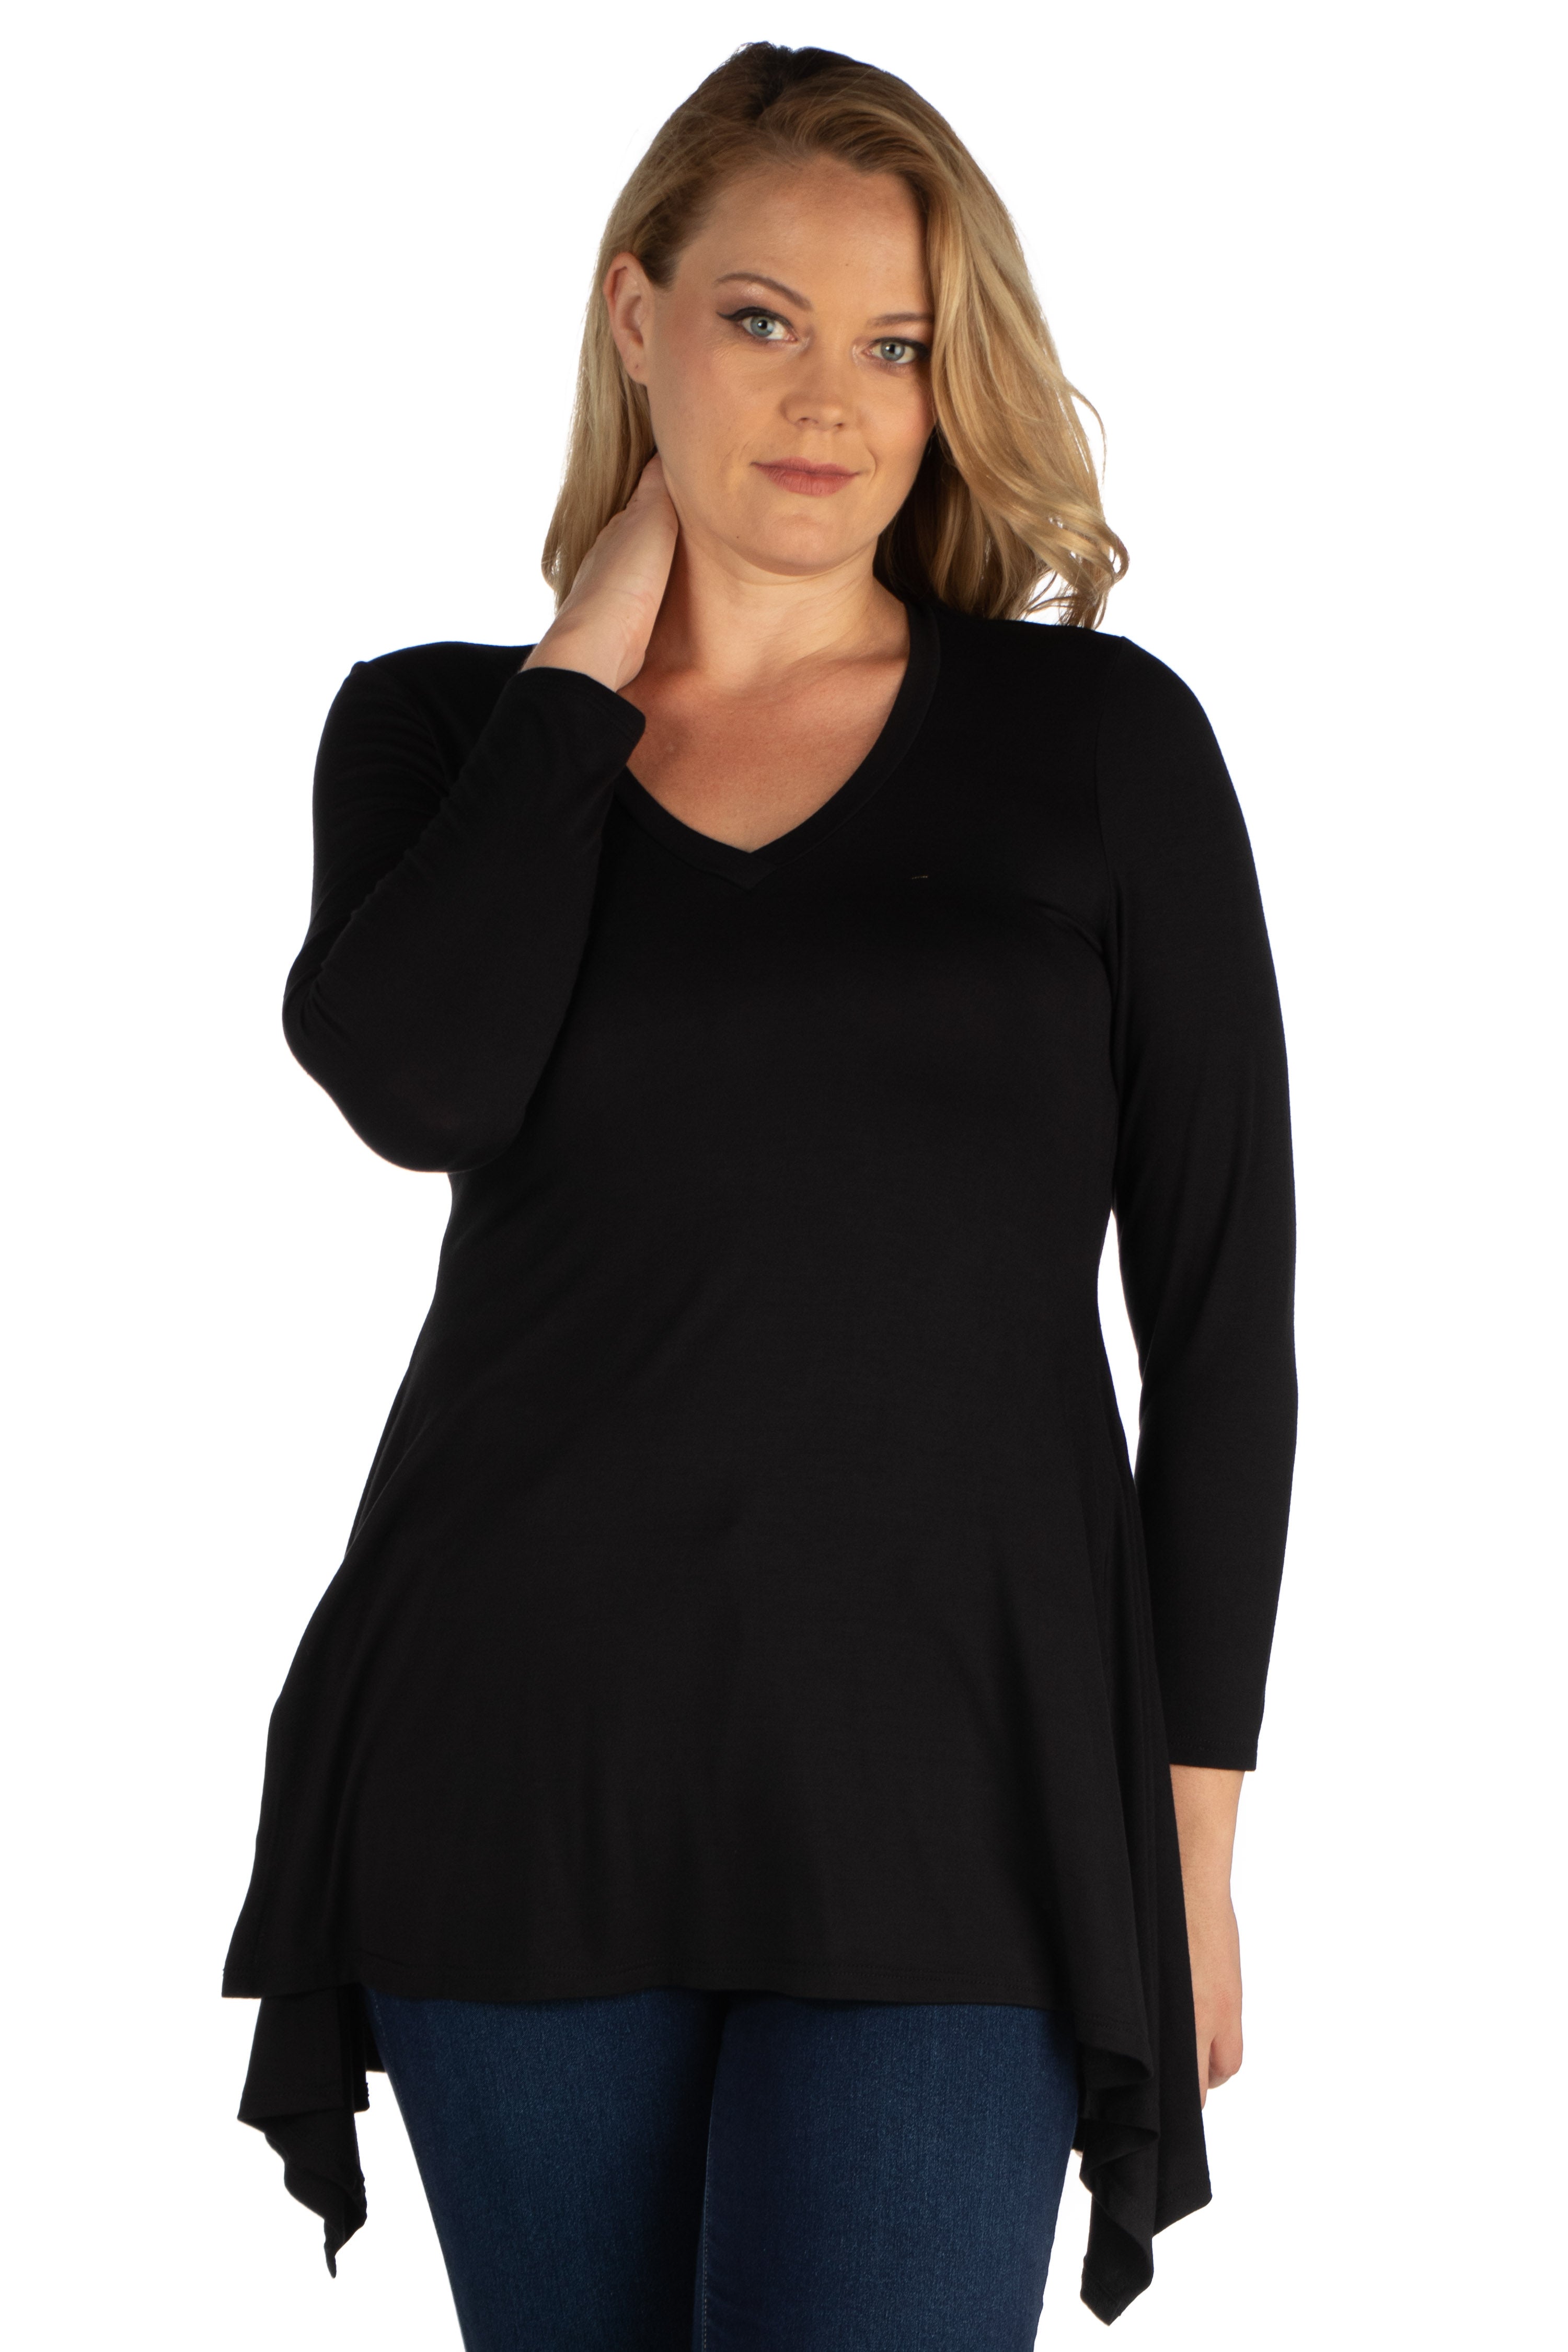 Long Black Tunic Tops To Wear With Leggings | International Society of  Precision Agriculture